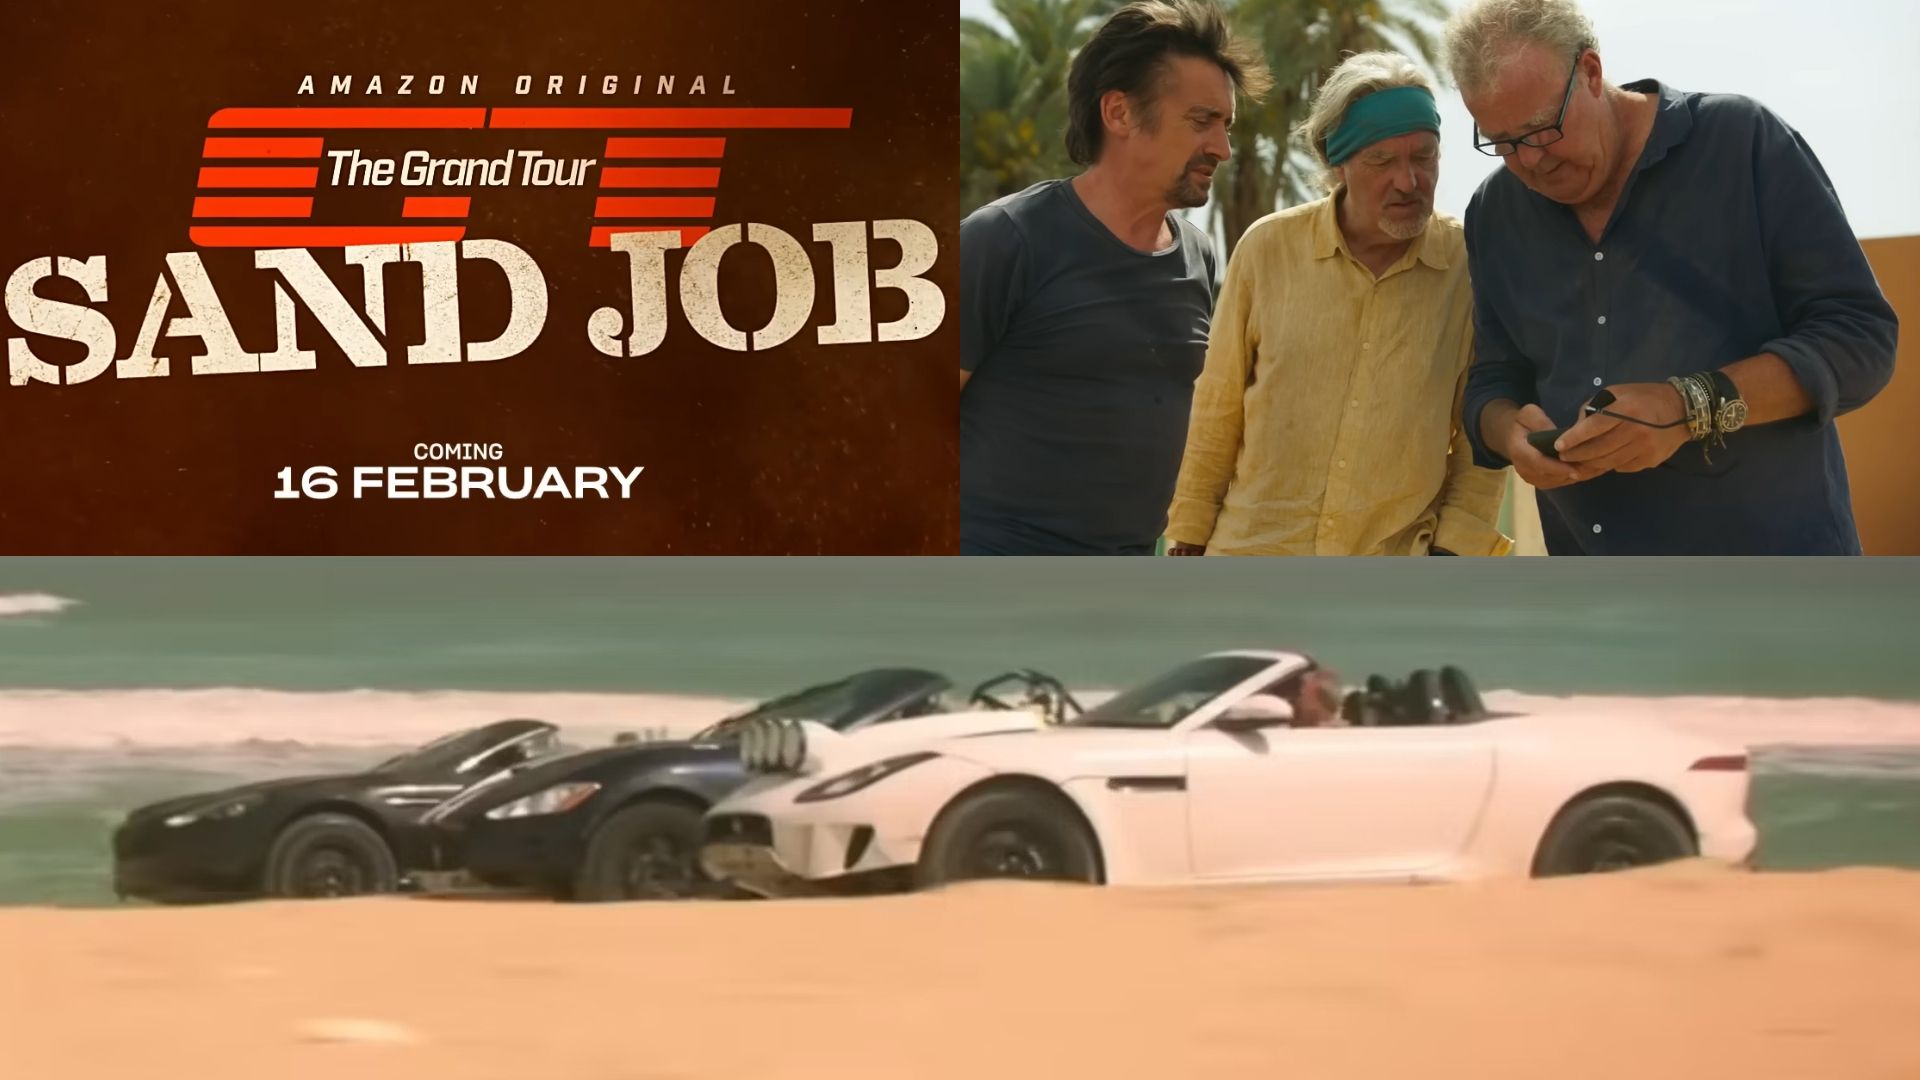 The Grand Tour Specials: Everything Confirmed About The Sand Job